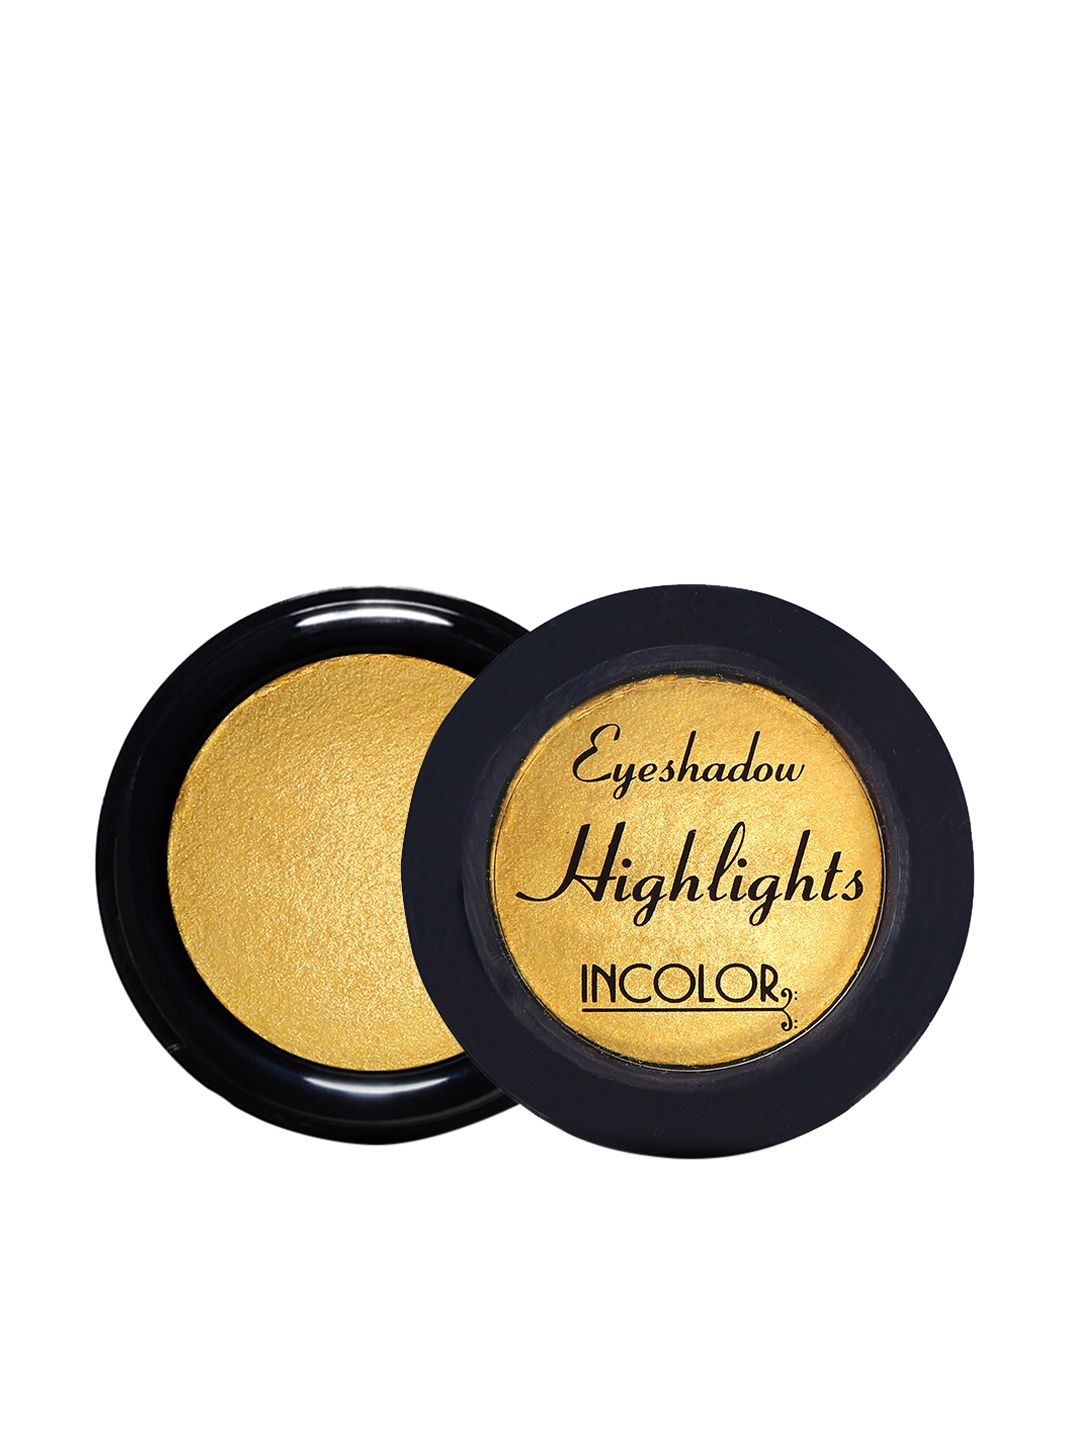 INCOLOR Highlighter Eyeshadow - 26 Price in India